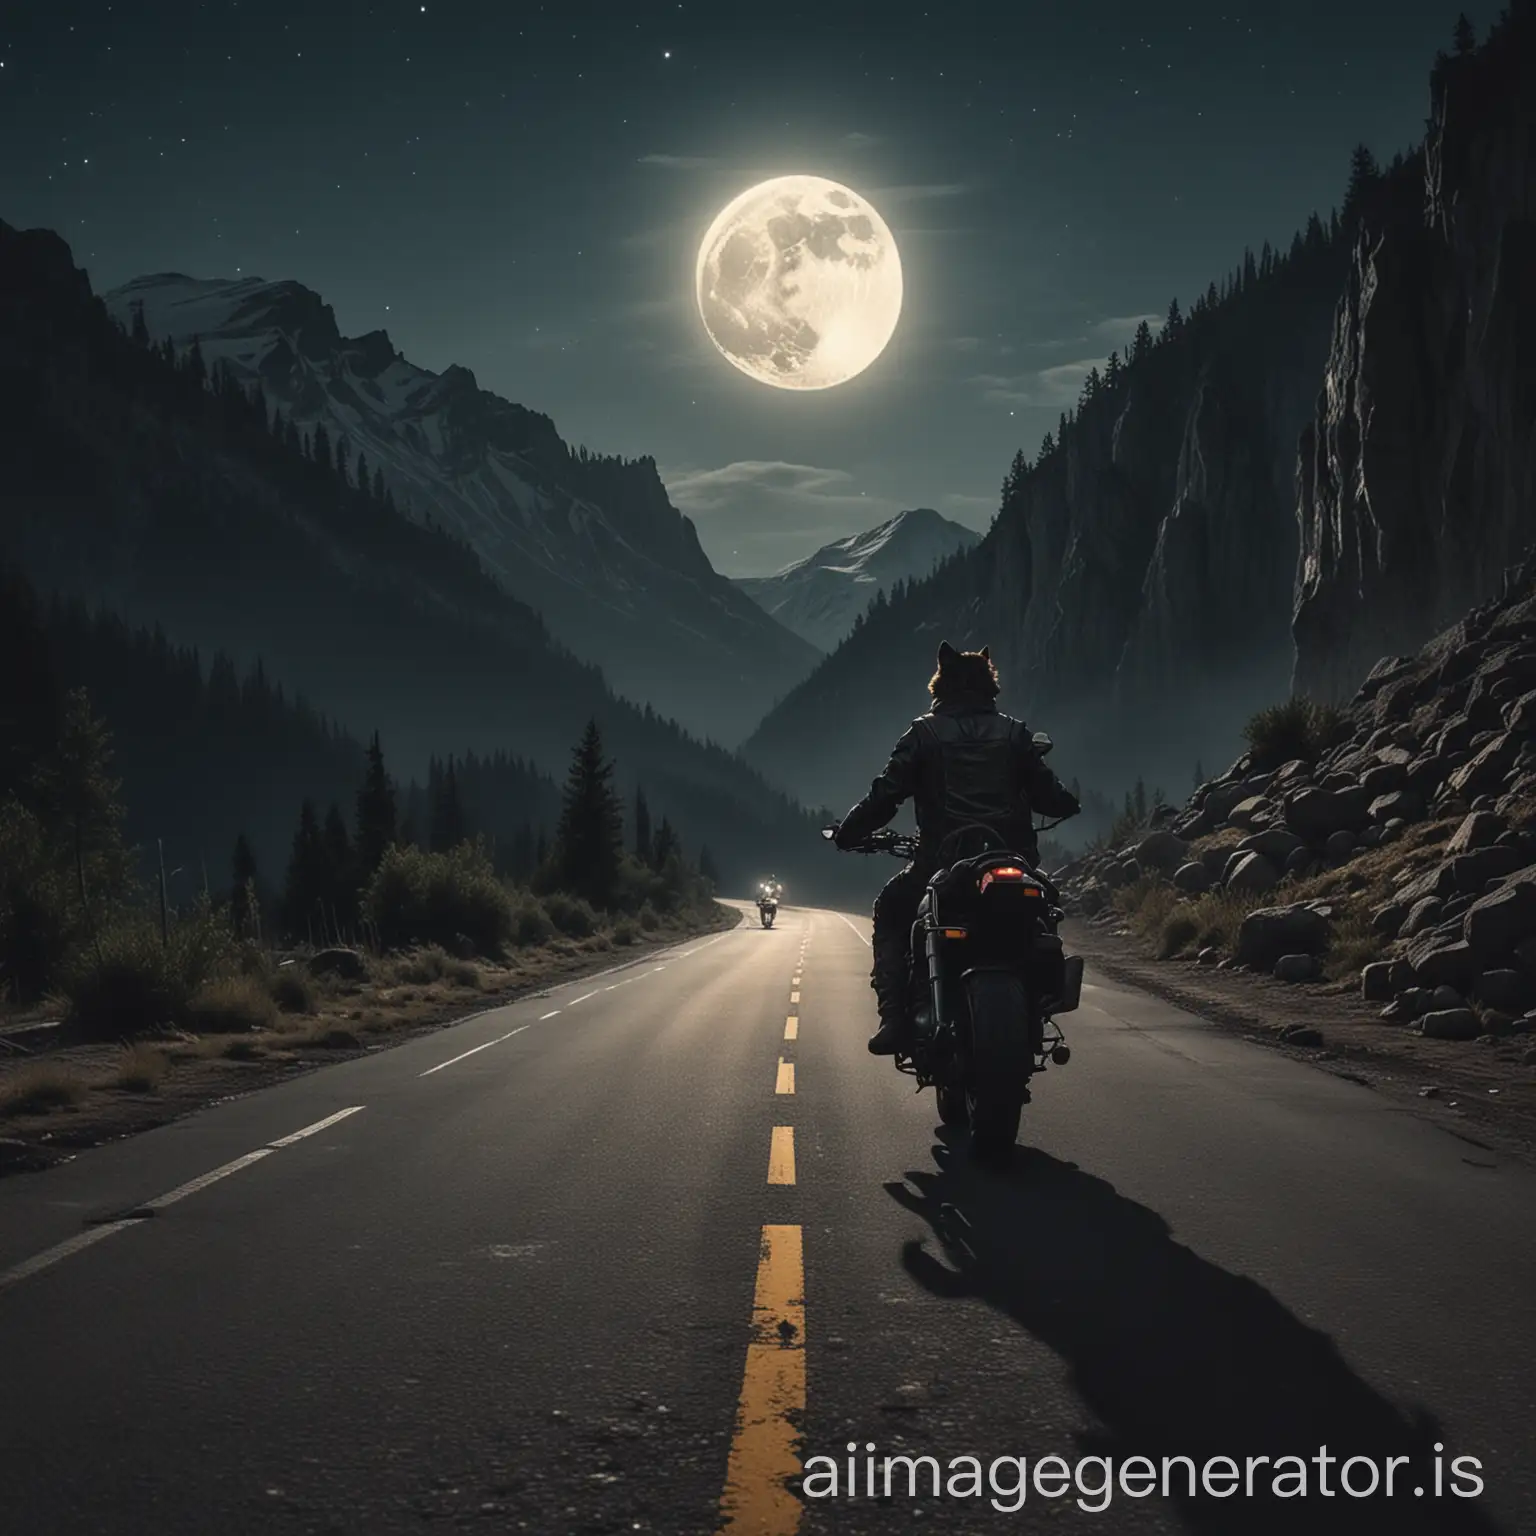 Wolf howling at a moon at night on a mountain.  At the bottom of the mountain is a motorcycle rider, on empty road.